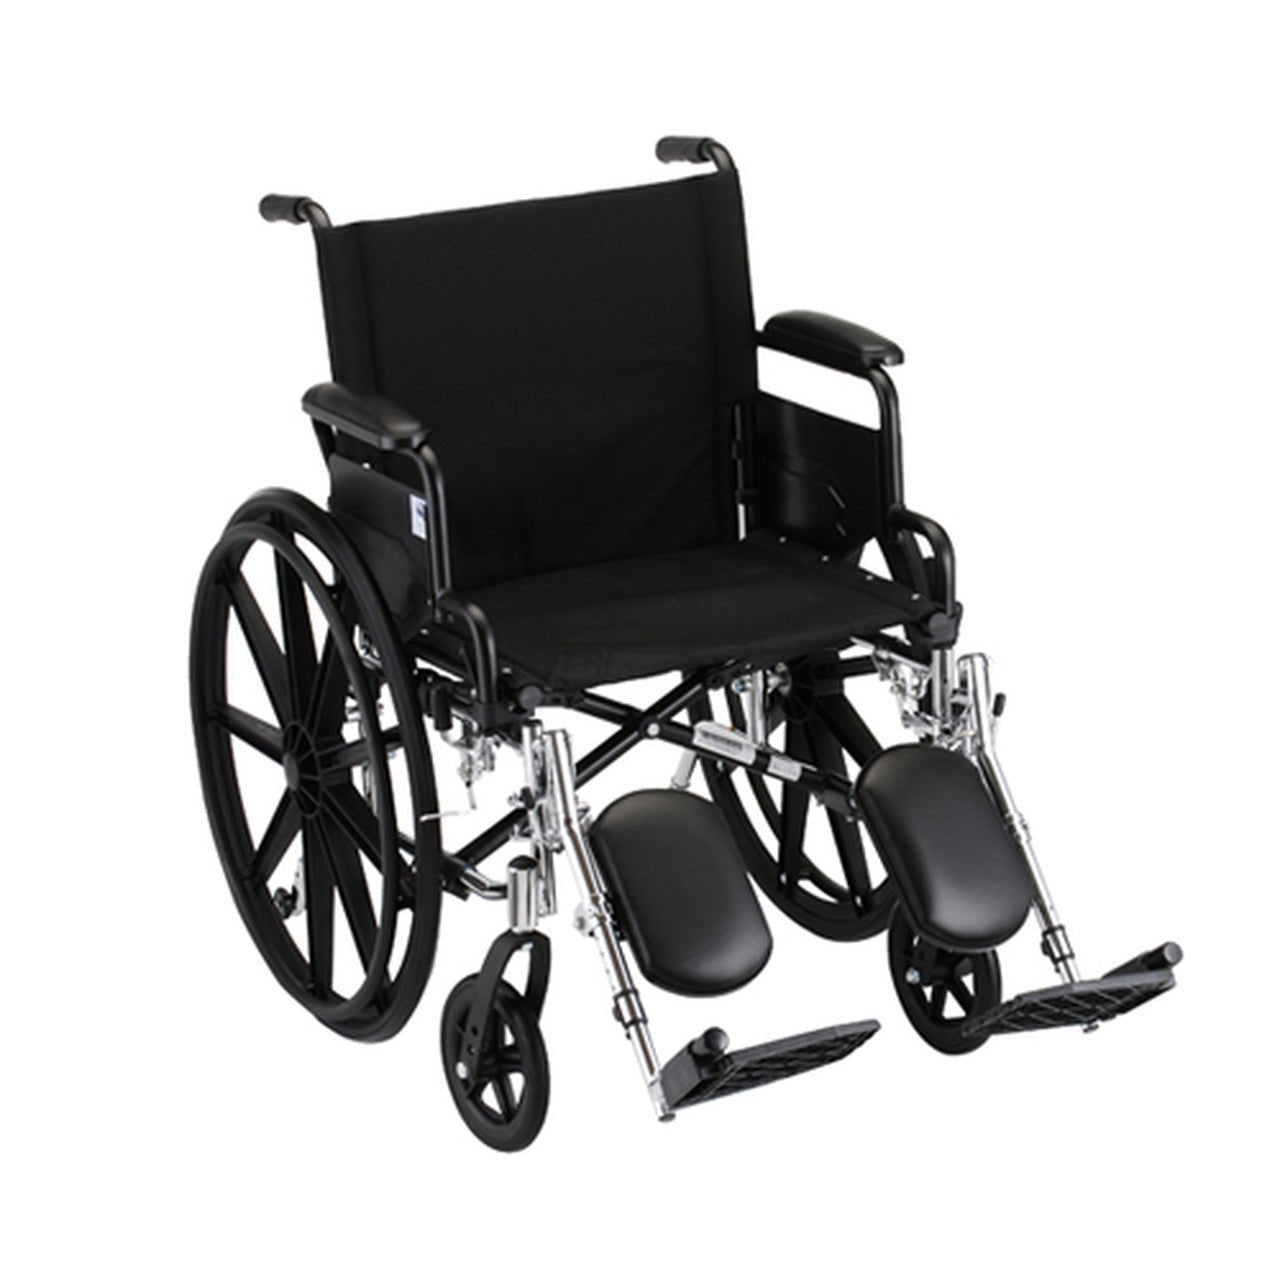 Nova 20" Lightweight Wheelchair with Full Arms & Elevating Leg Rests - Midwest DME Supply